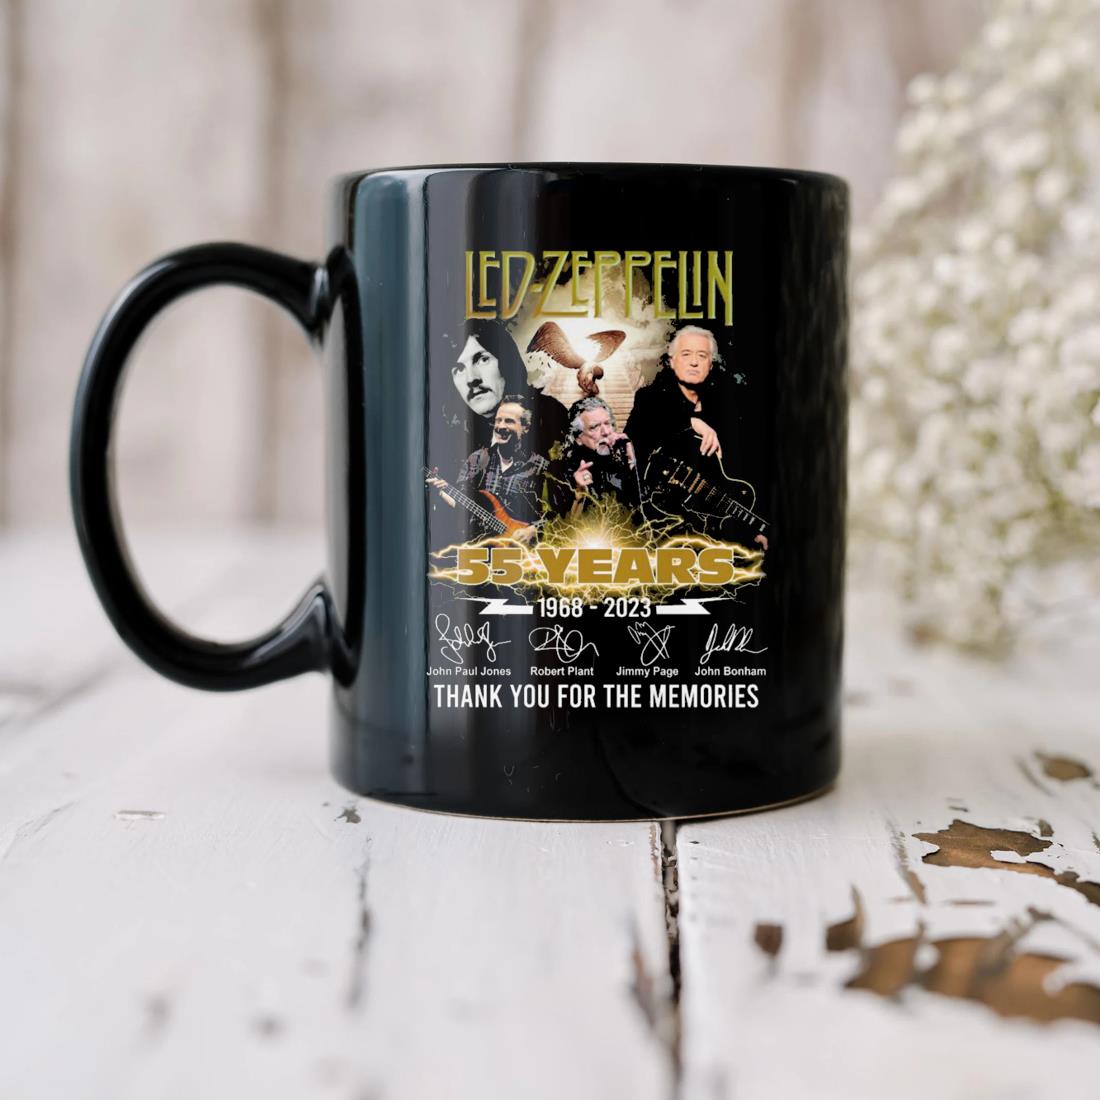 Led Zeppelin 55 Years 1968-2023 Thank You For The Memories Signatures Mug biu